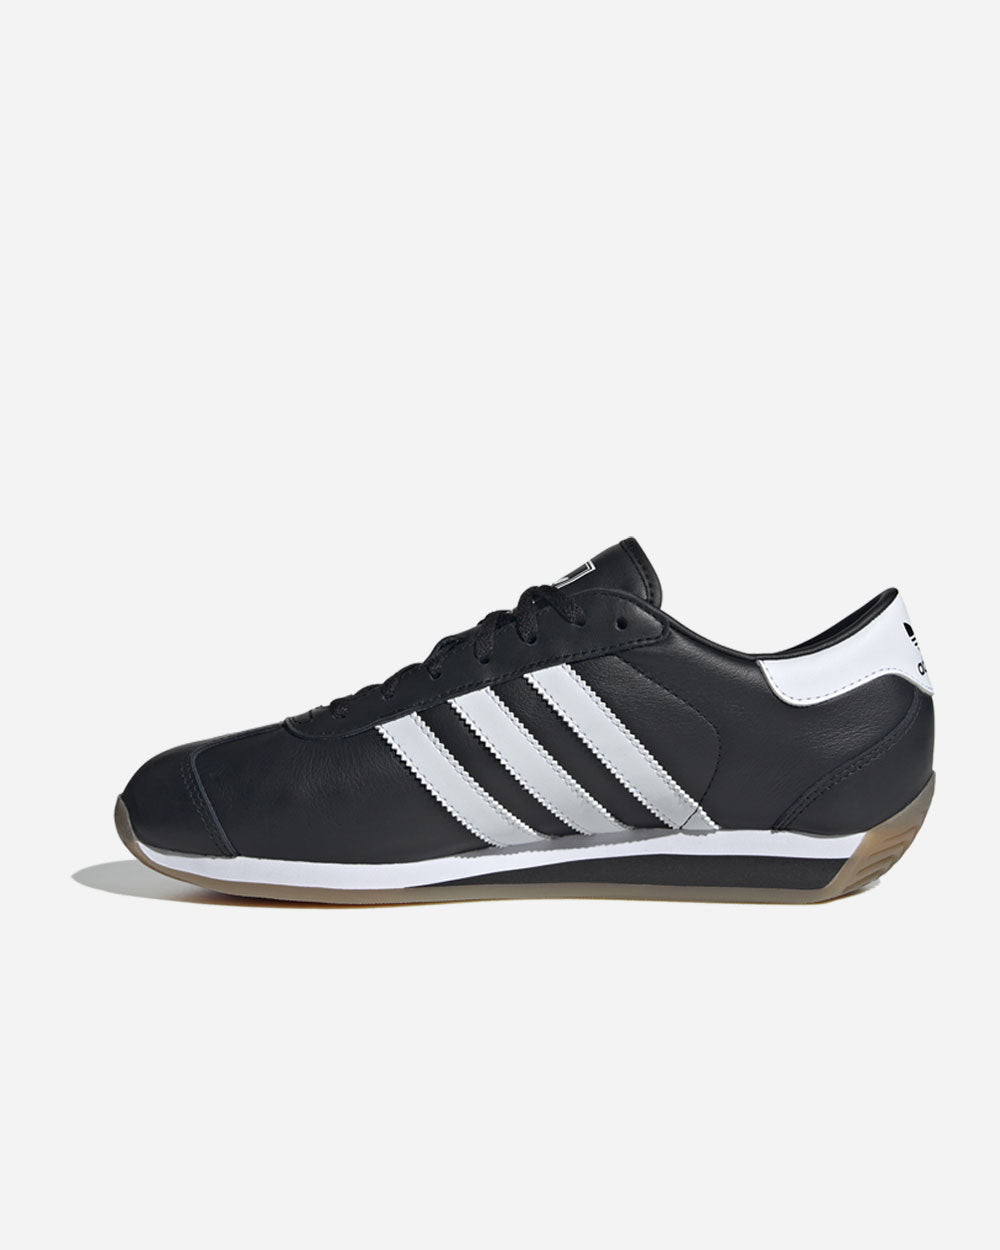 Adidas Country Ii Black/White/Carbon ID6600